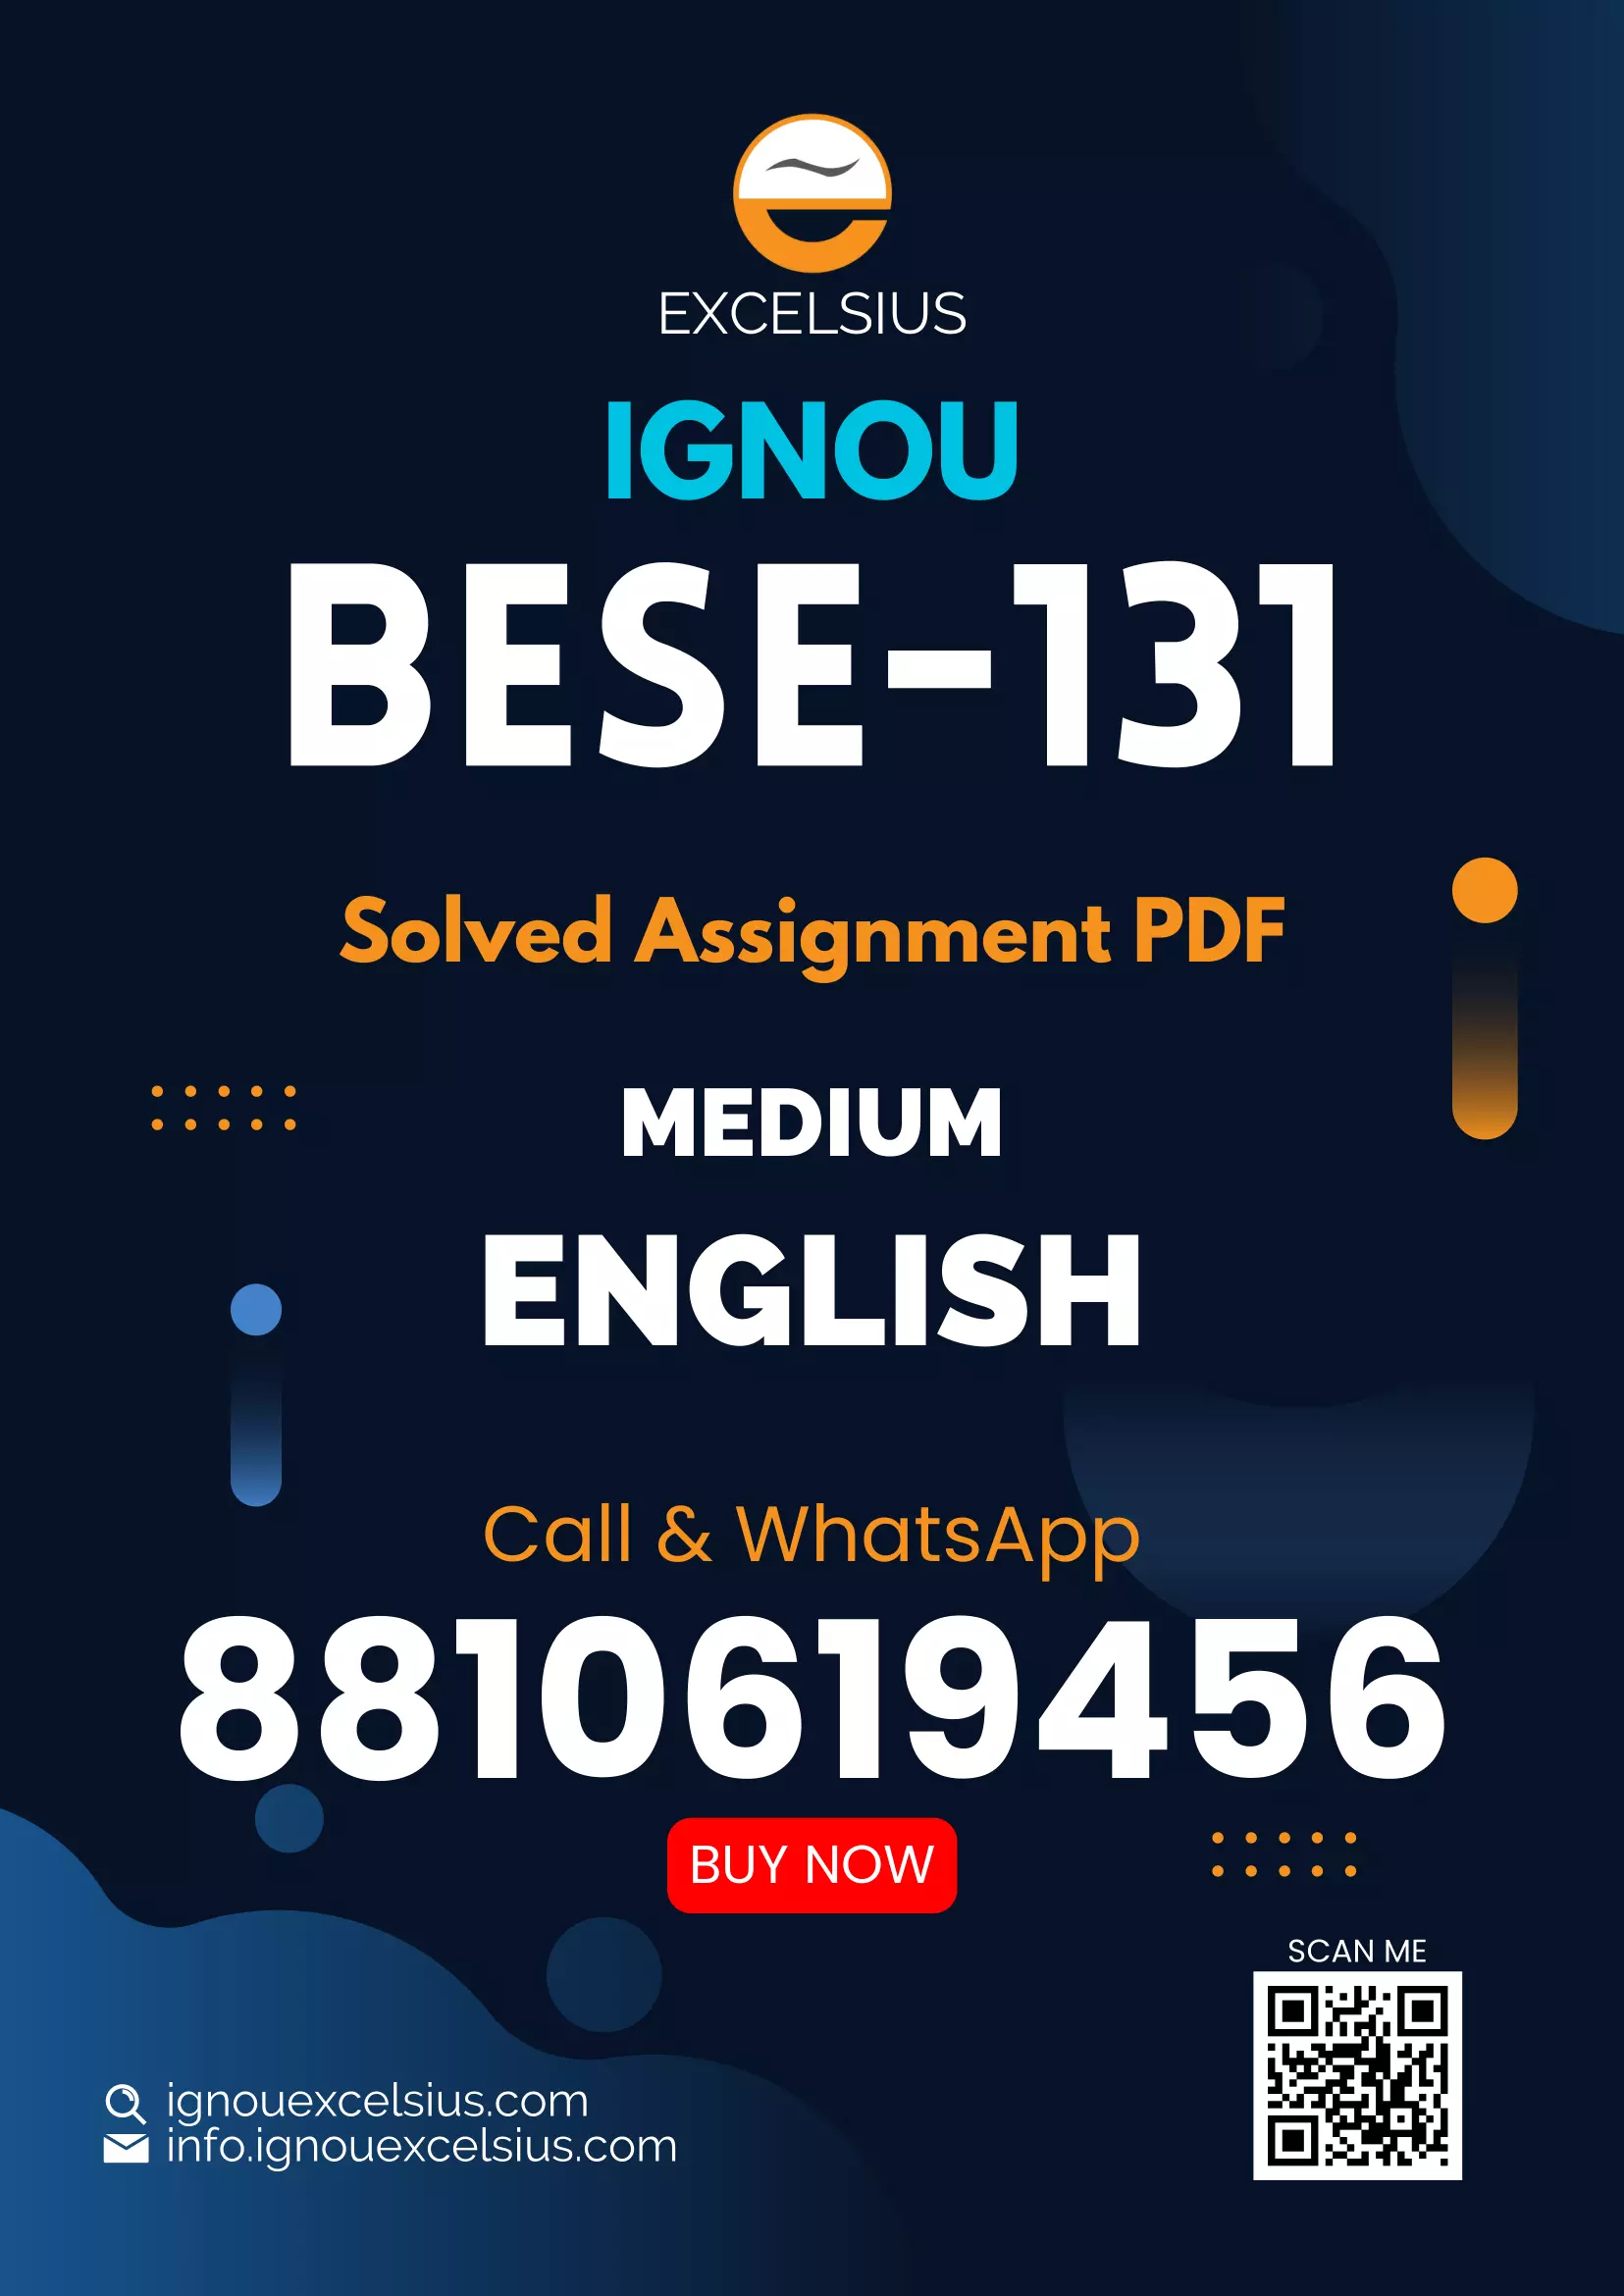 IGNOU BESE-131 - Open and Distance Education, Latest Solved Assignment-January 2021 - July 2021